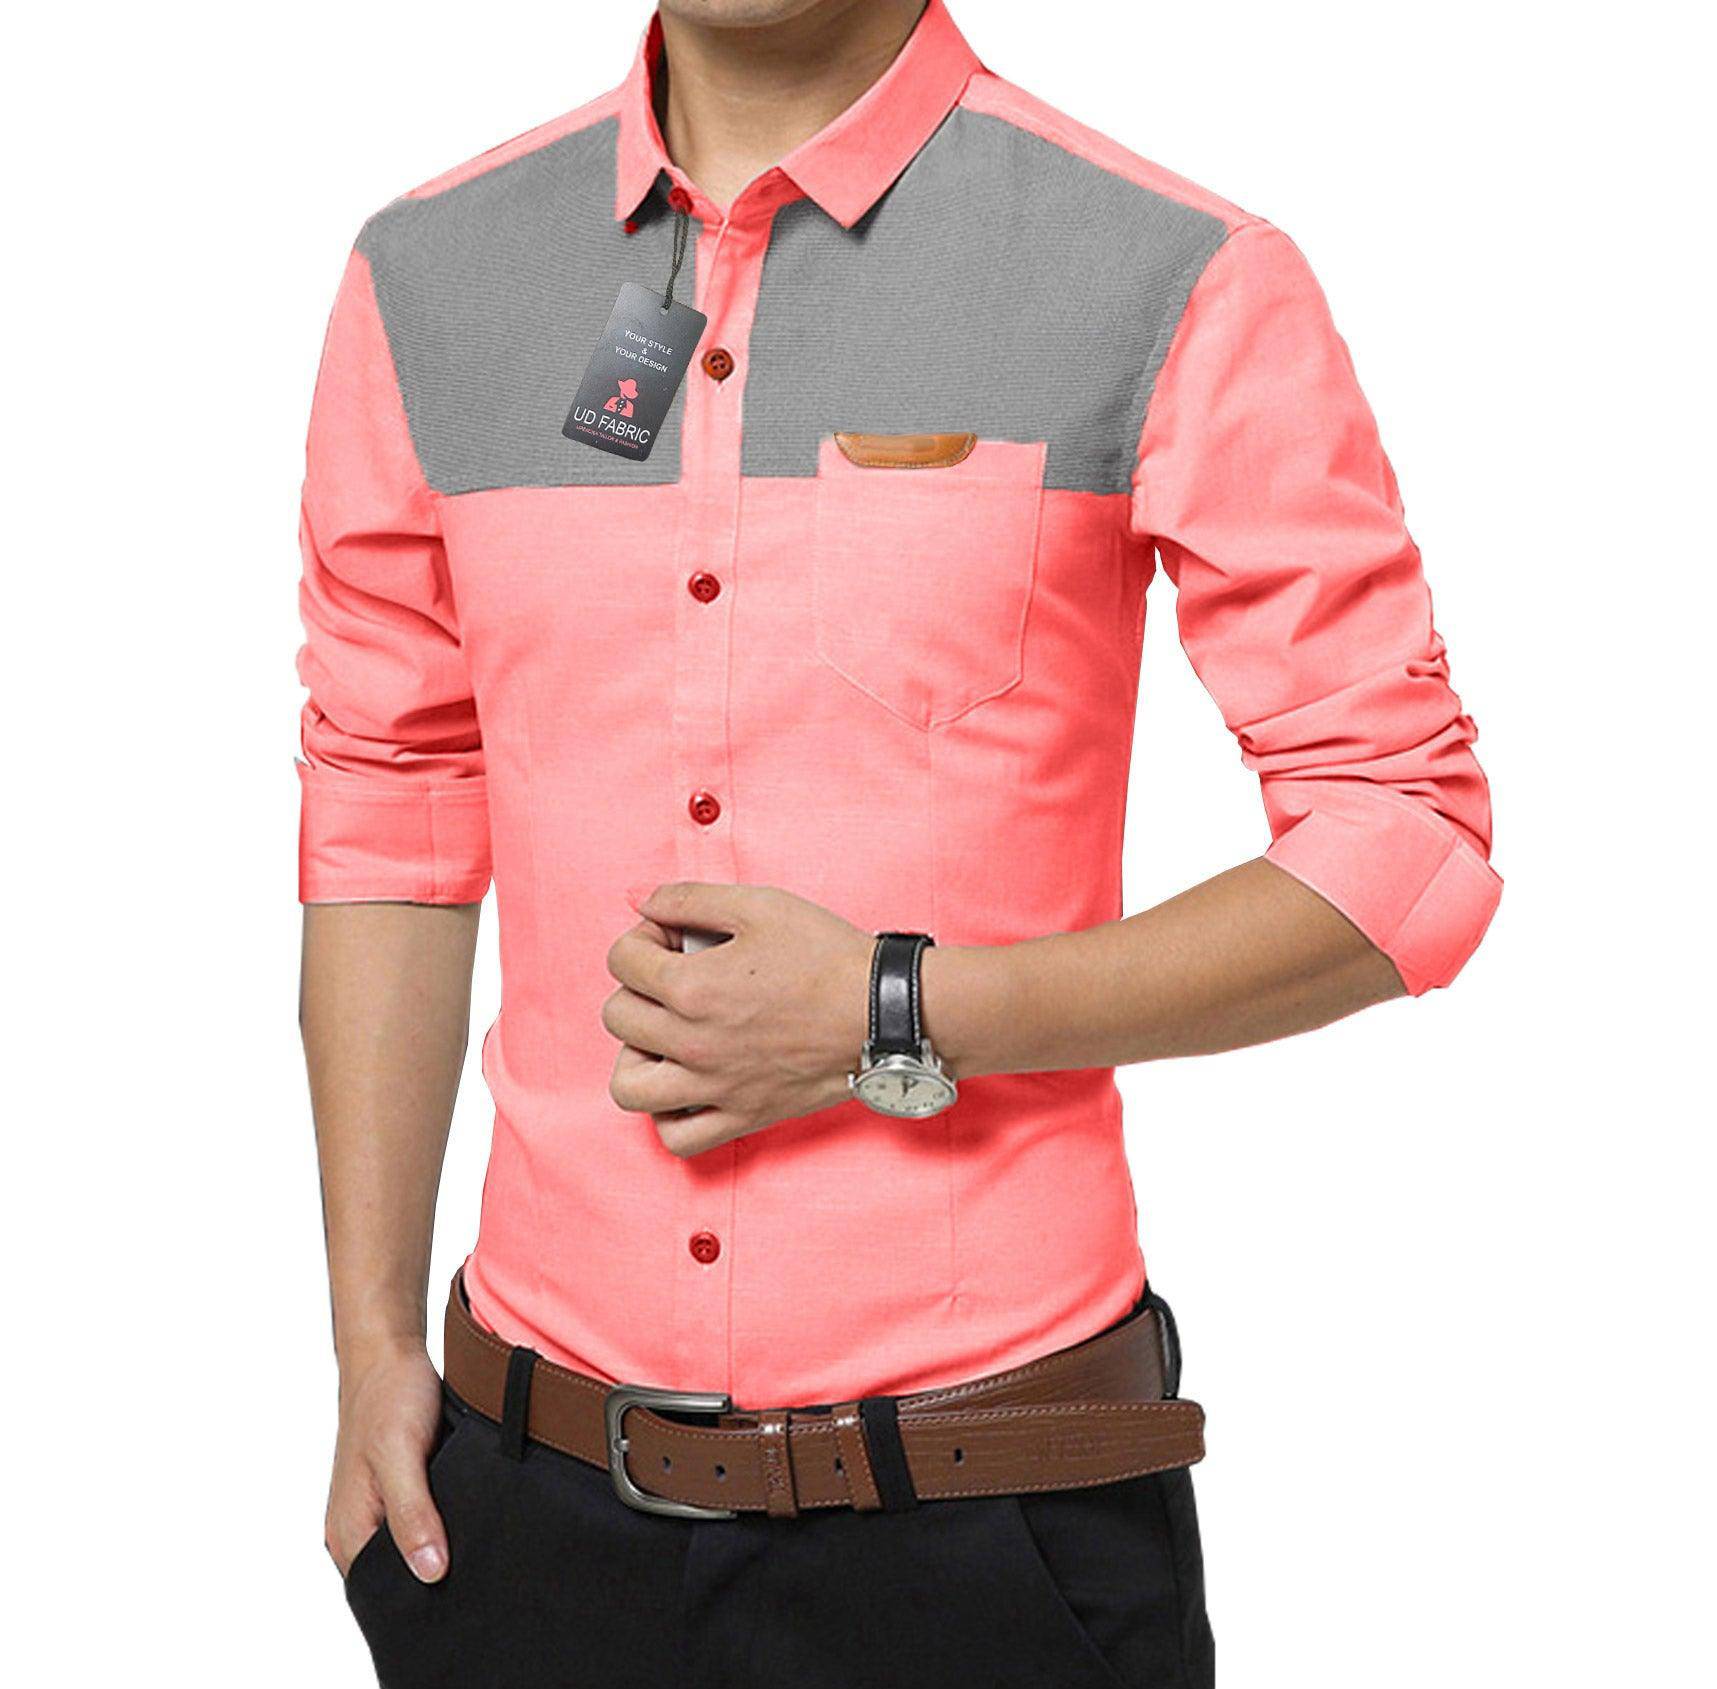 UD FABRIC Casual Slim Cotton Shirt for Men - Pink - UD FABRIC - Your Style our Design